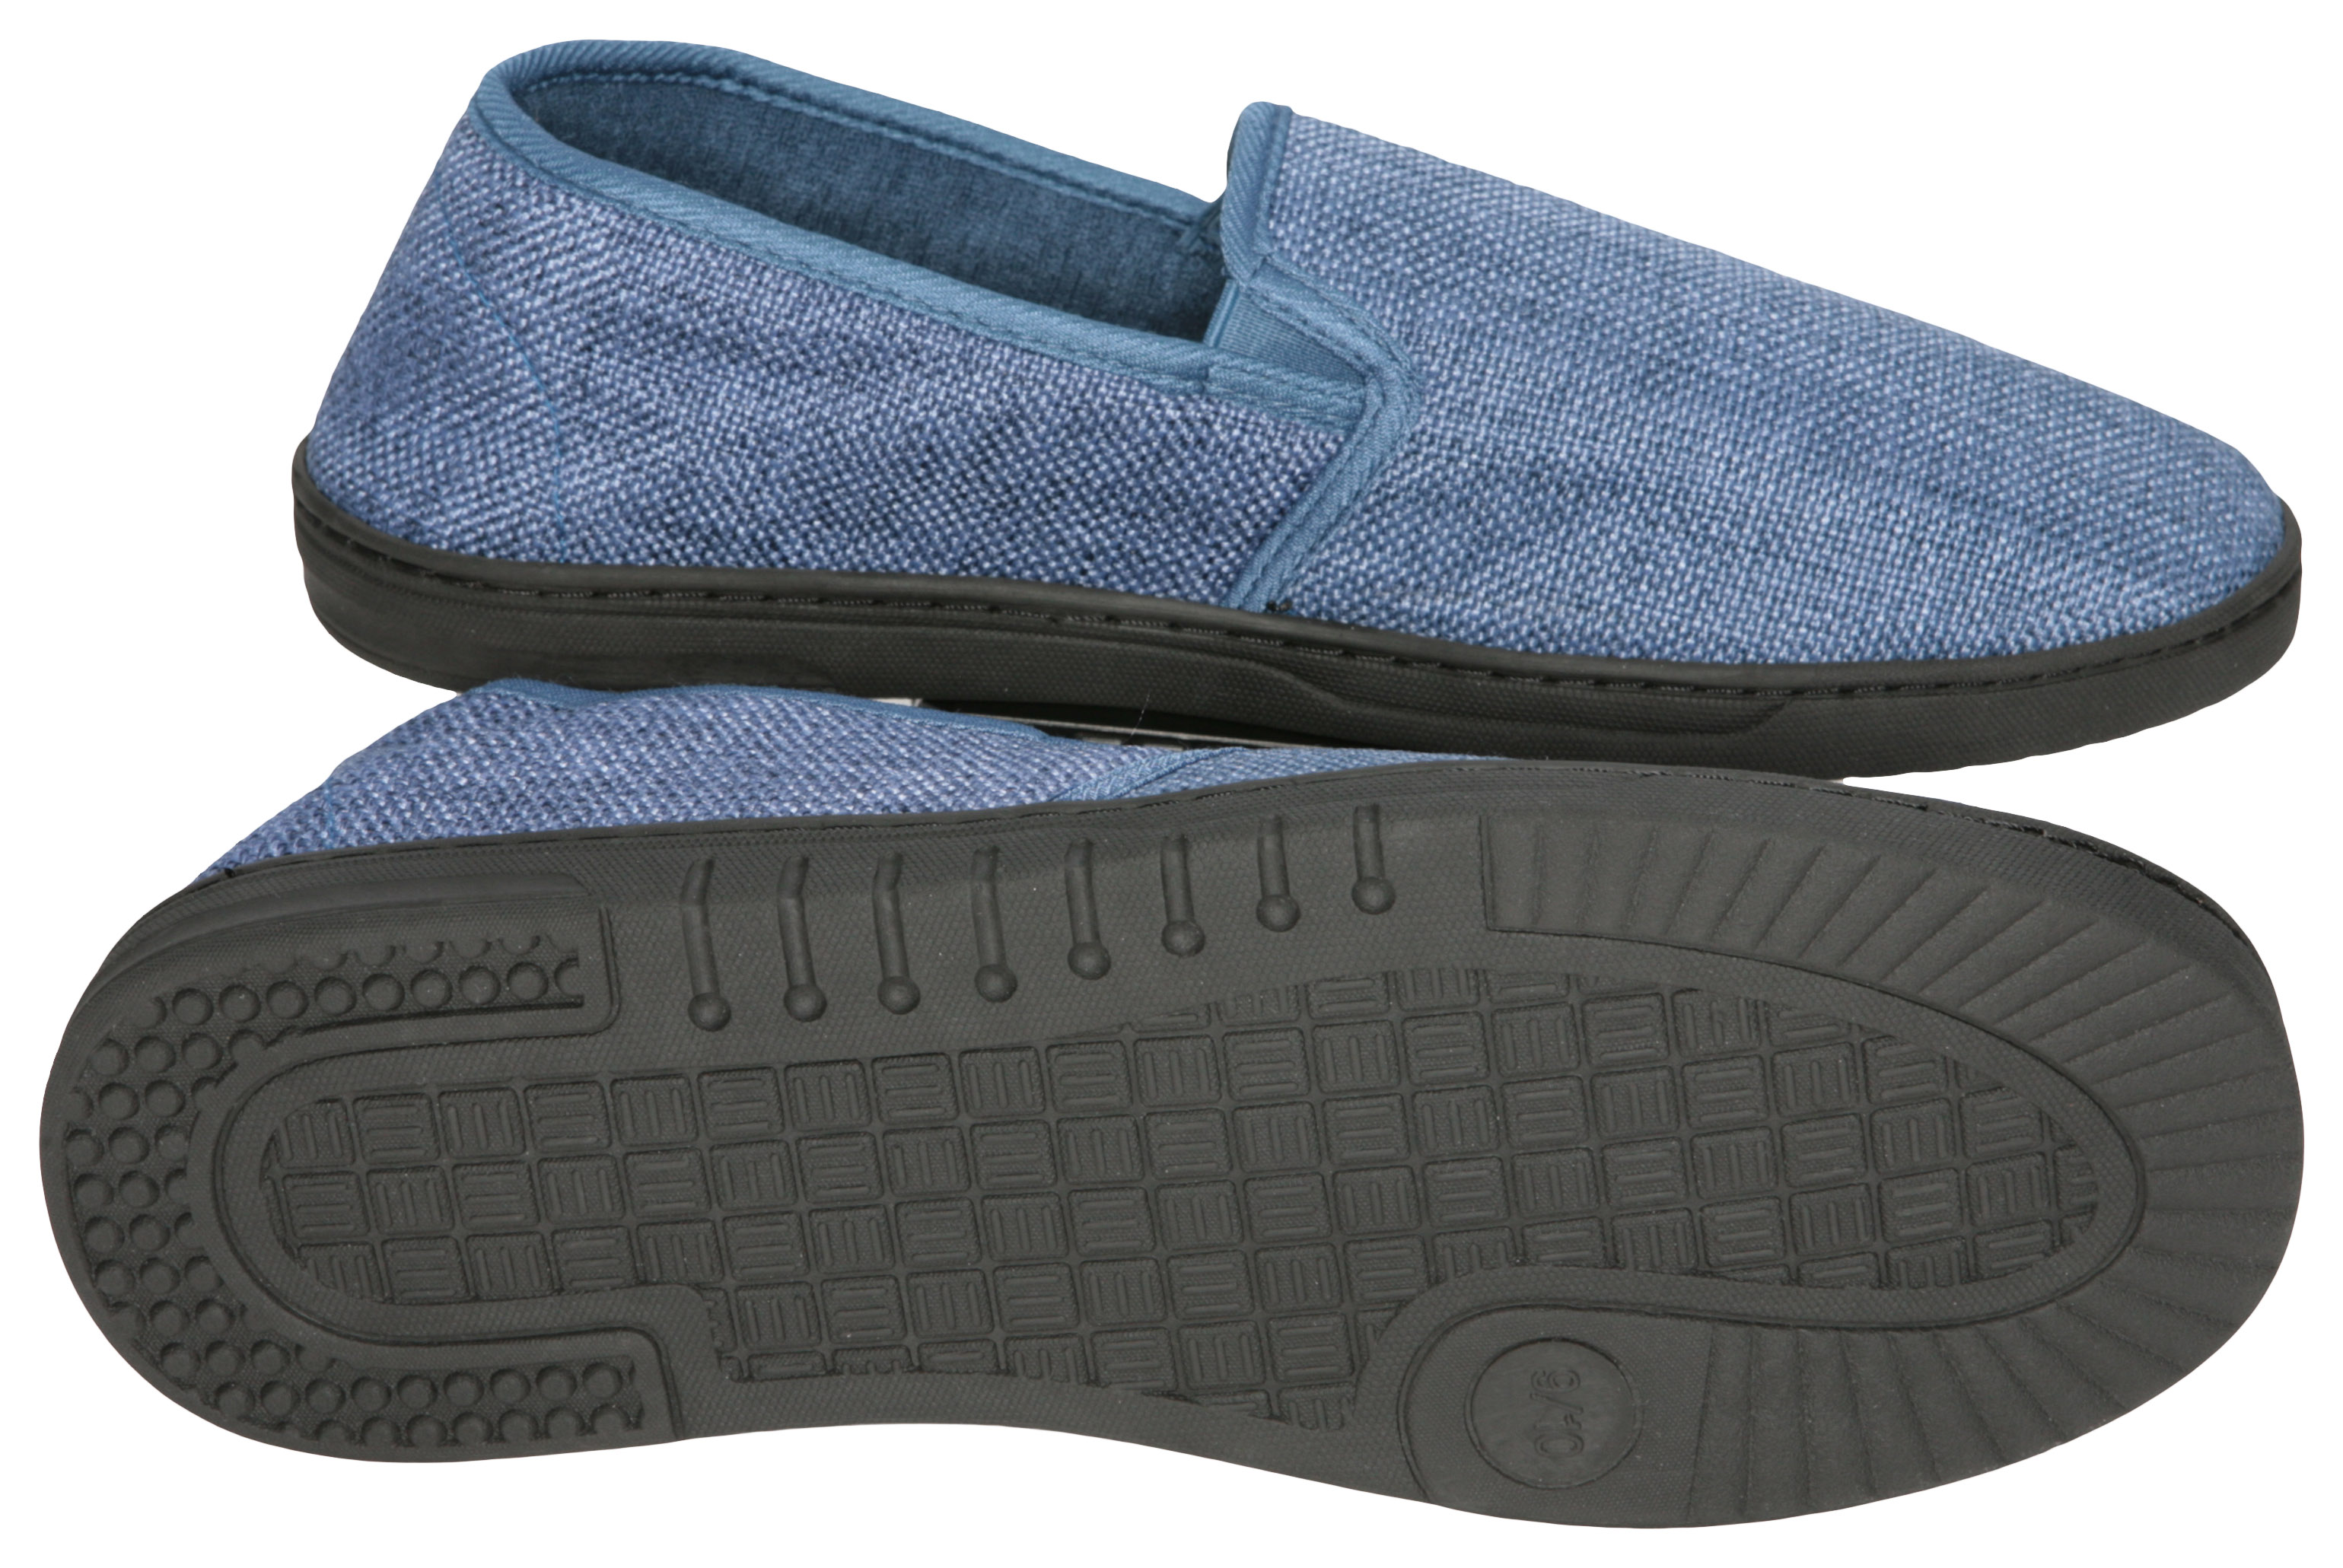 Deluxe Comfort Men's Memory Foam Slipper, Size 11-12 – Soft Linen 120D SBR Insole and Rubber Outsole – Pure Suede Shoes – Non-Marking Sole – Men's Slippers, Blue - image 5 of 5